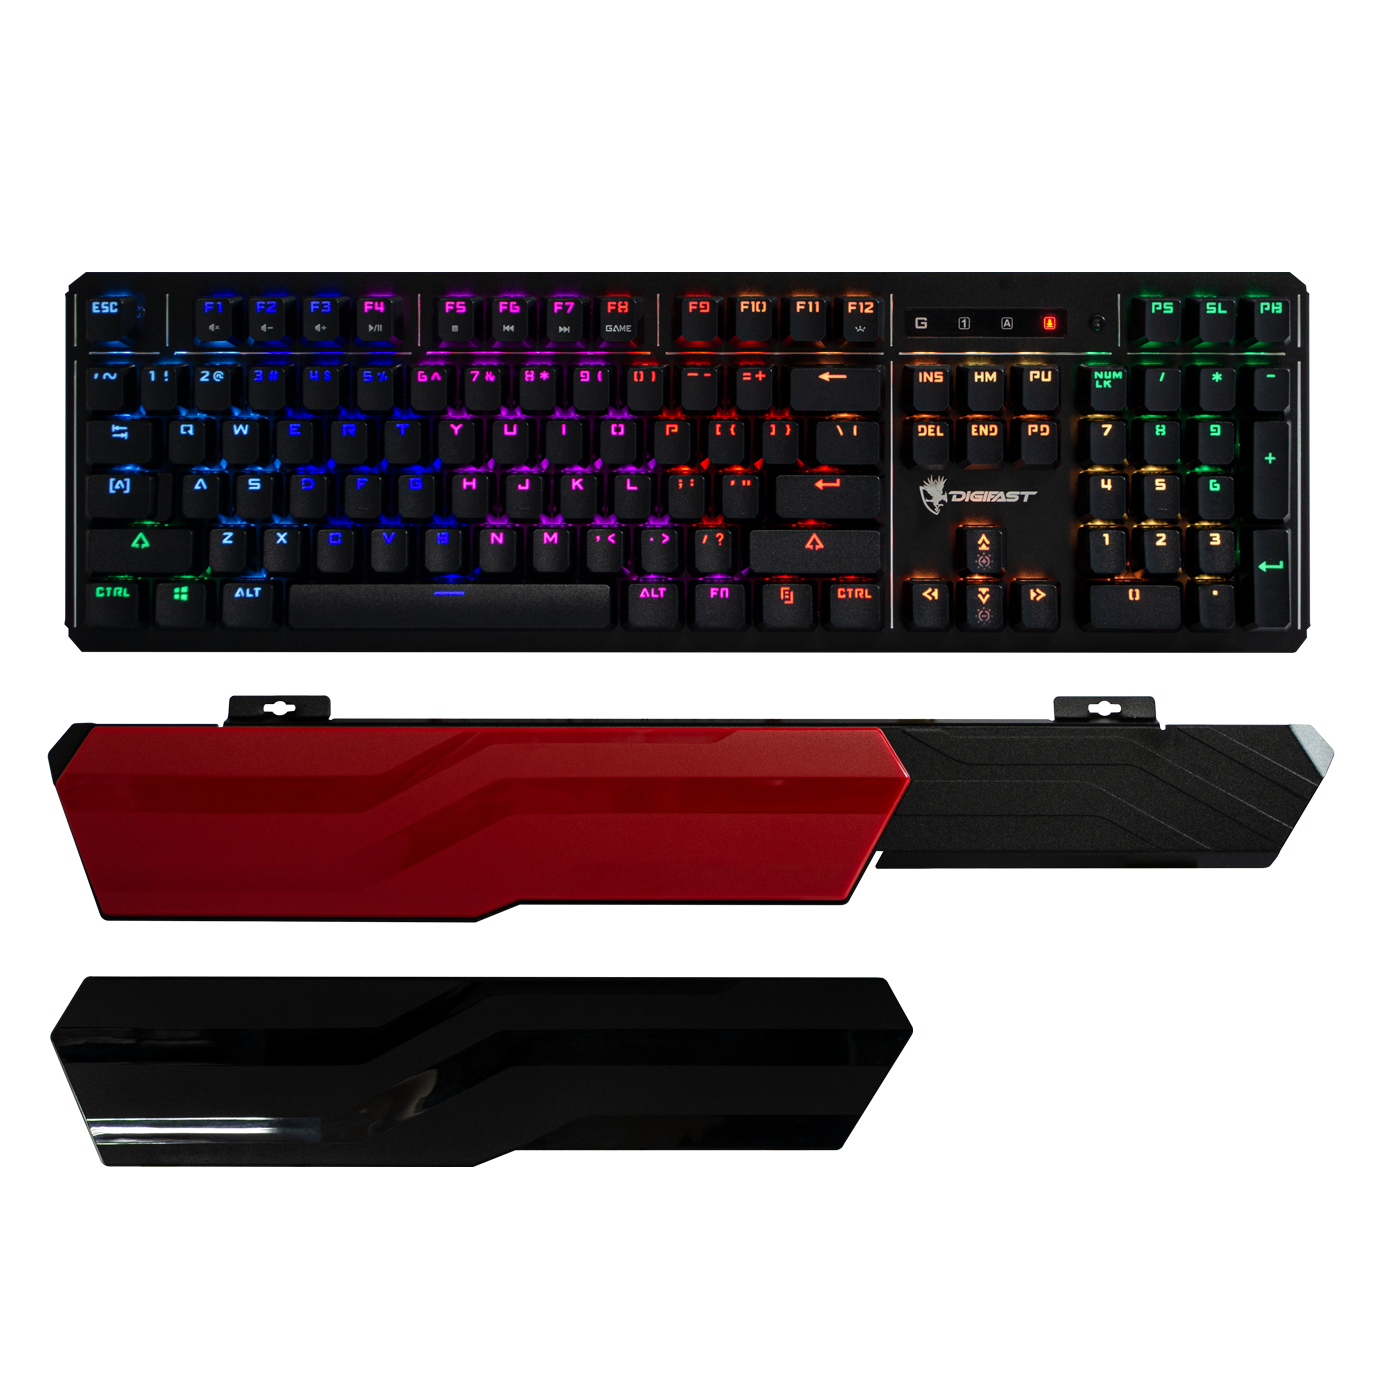 Digifast LK42 Mechanical RGB Gaming Keyboard, Optical Clicky Switches 100 million durability, Customizable Color, Water-Resistant Design, Wrist Rest